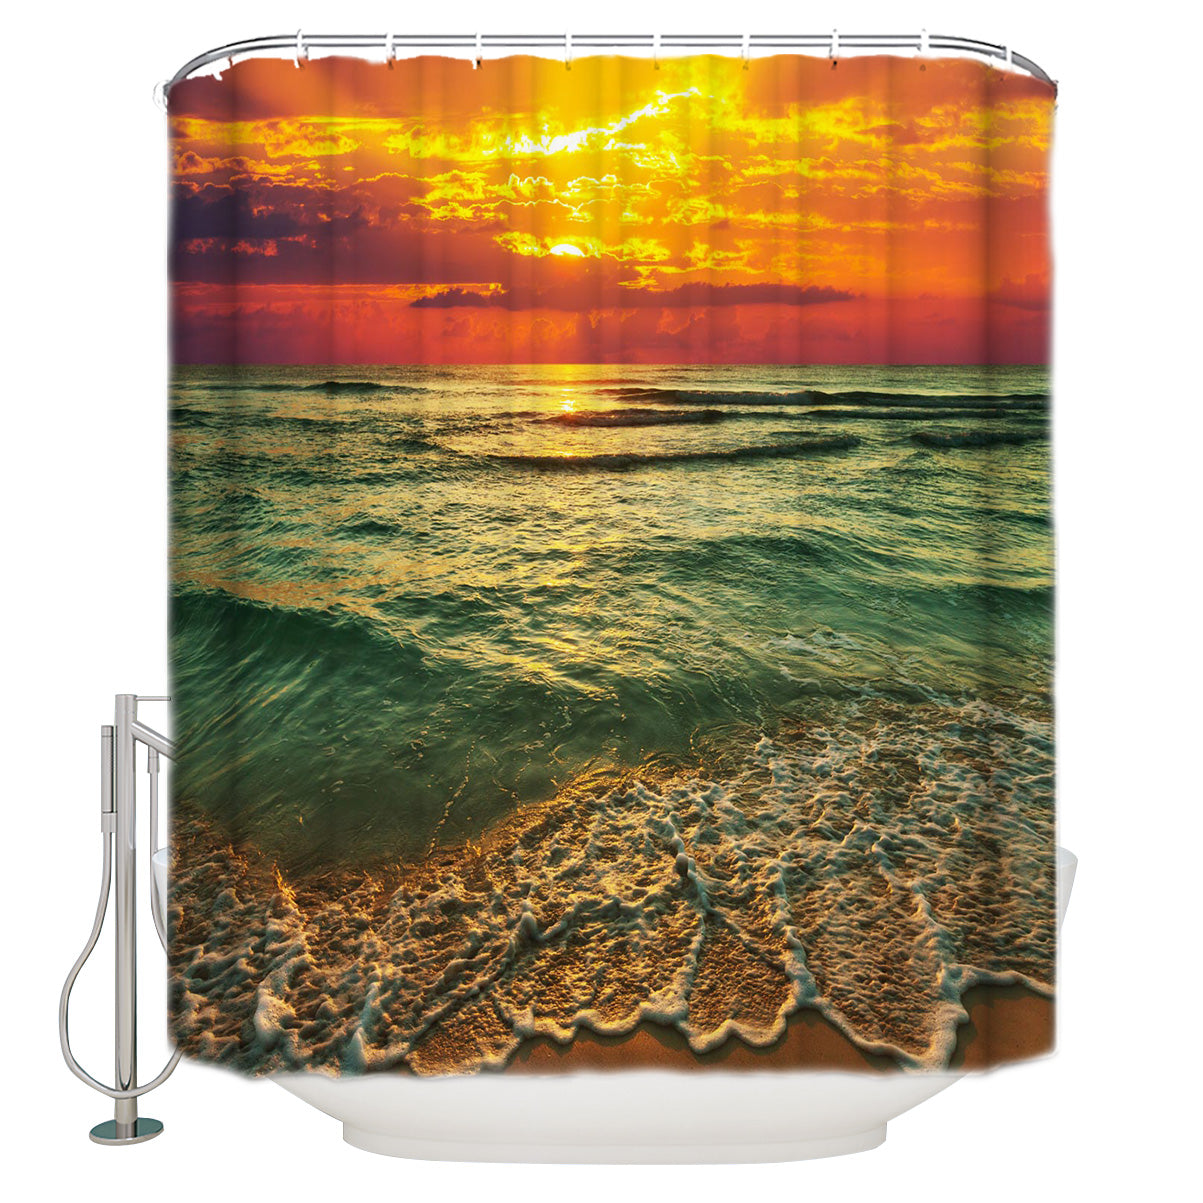 Red Sunset Beach Waves Shower Curtain | Red Sunset Waves Bathroom Curtain